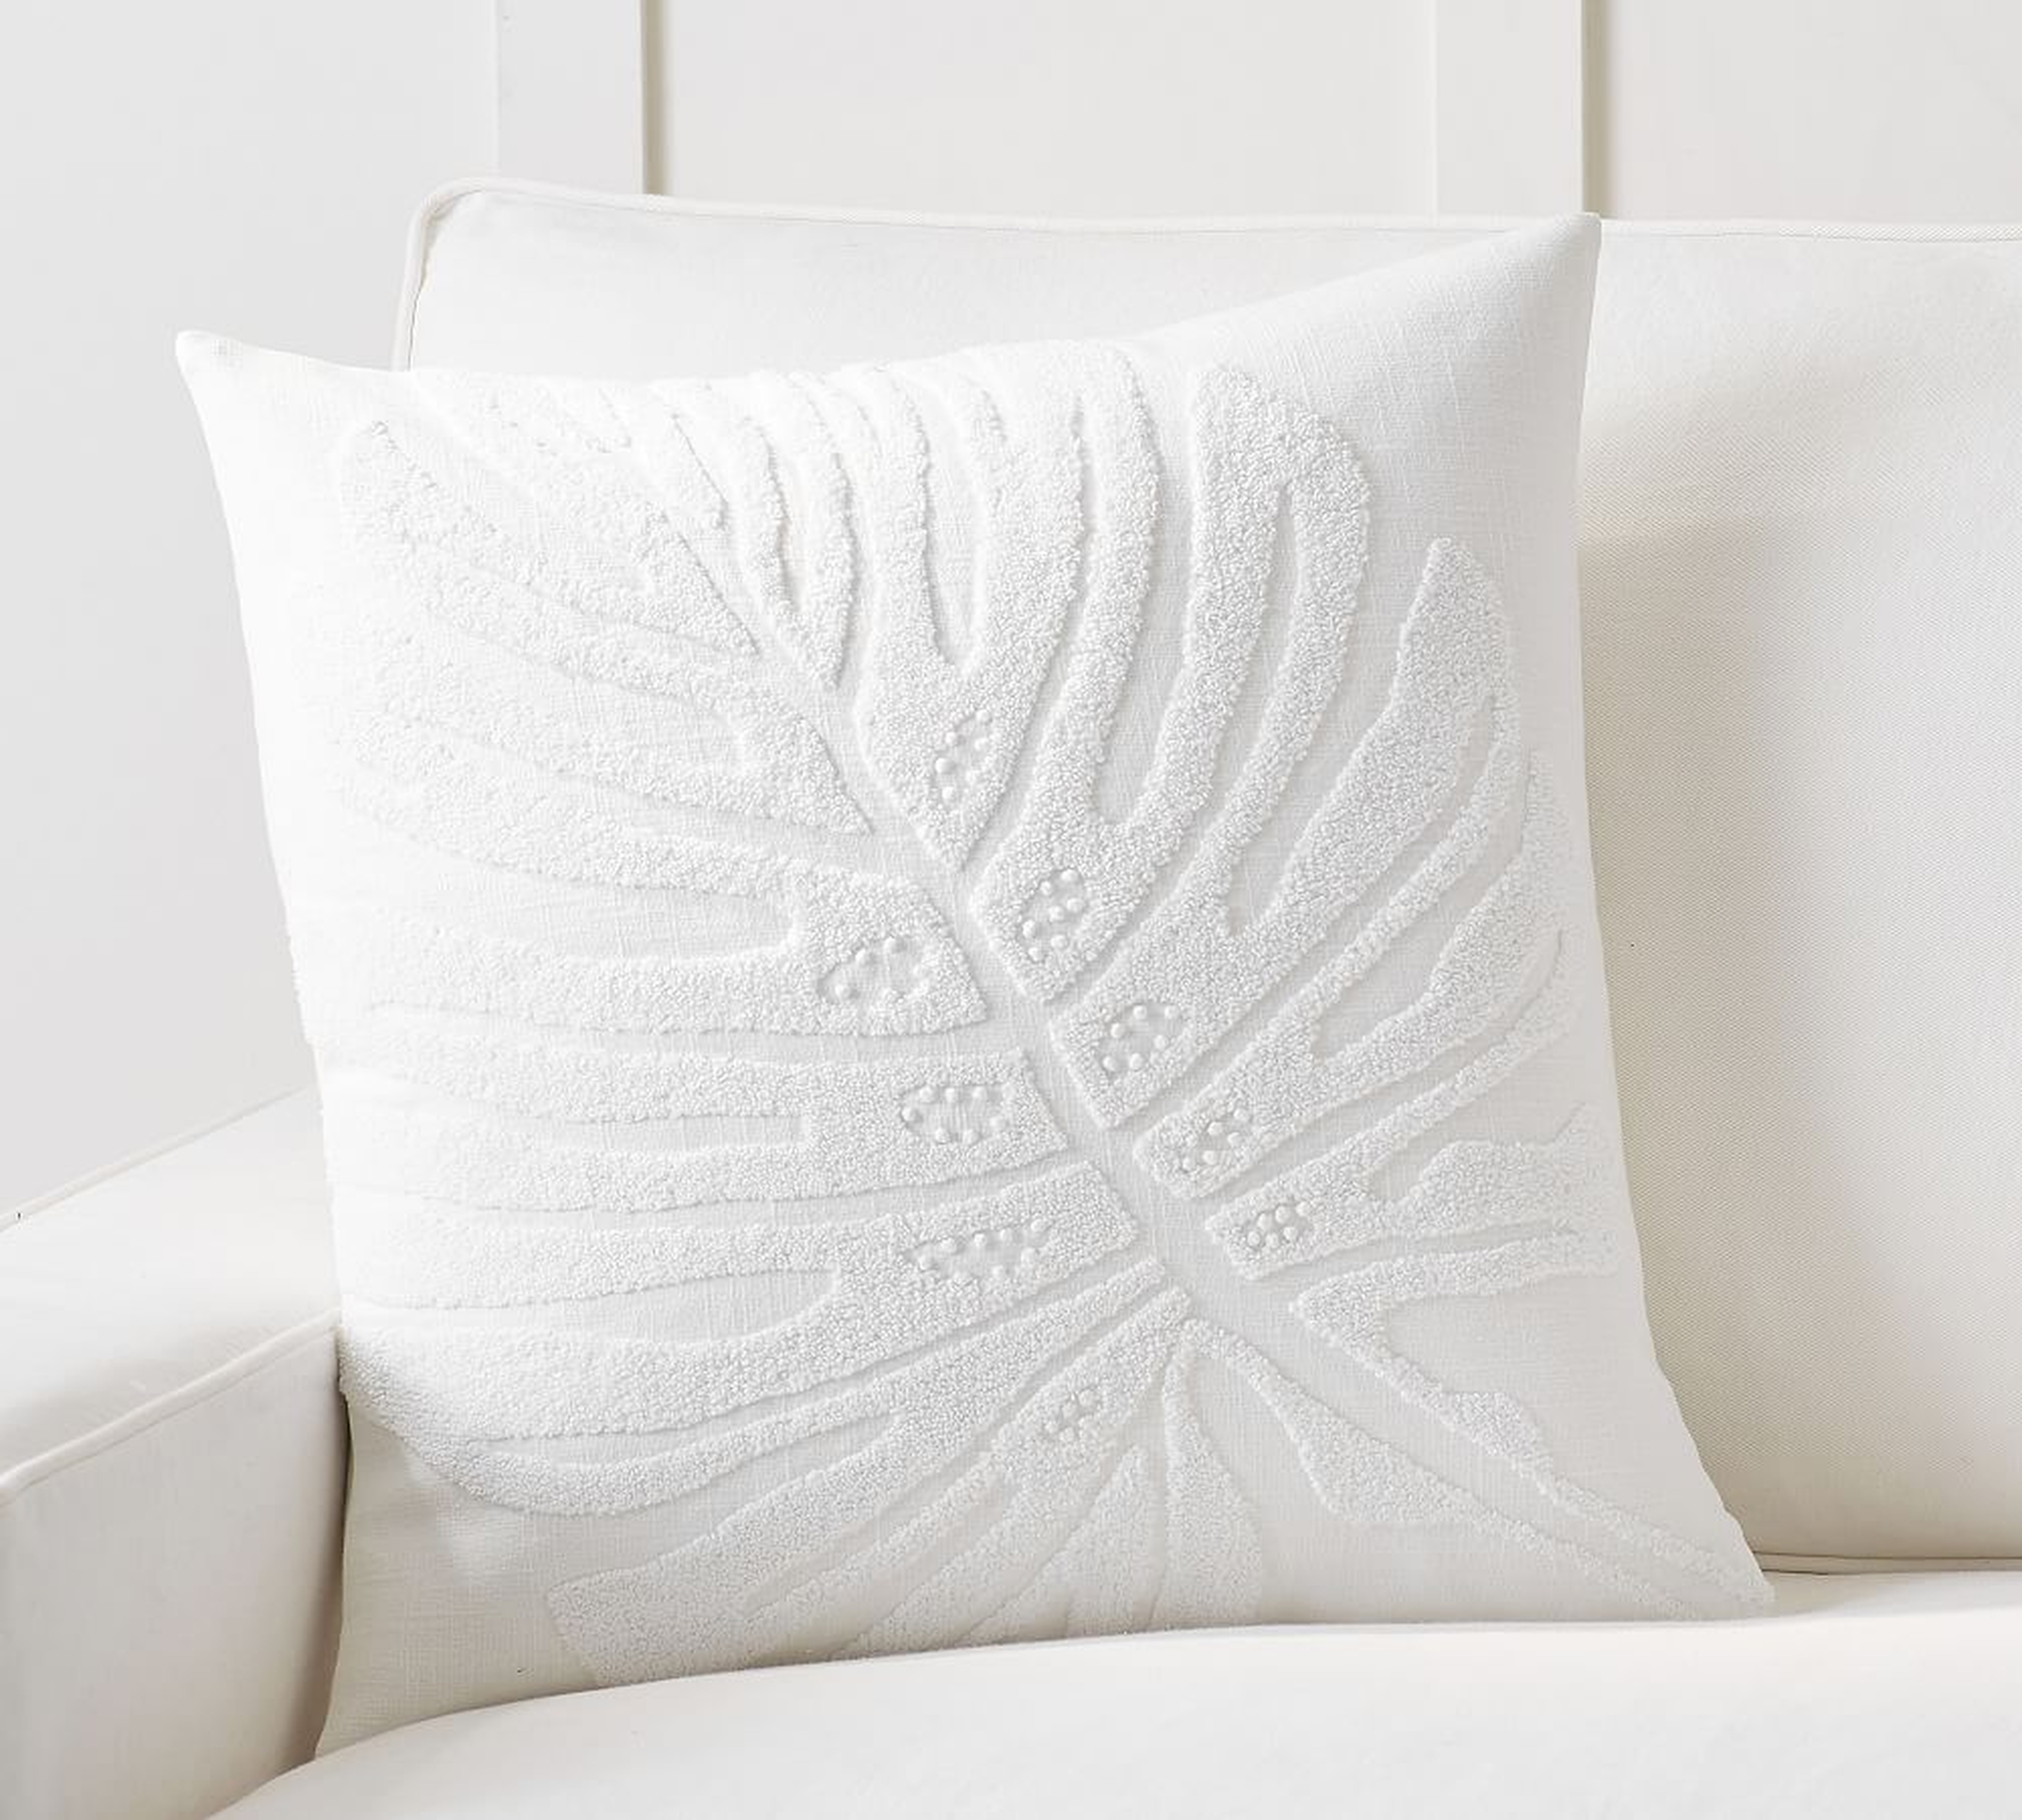 Isla Palm Embroidered Pillow Cover, 20 x 20", White - Pottery Barn